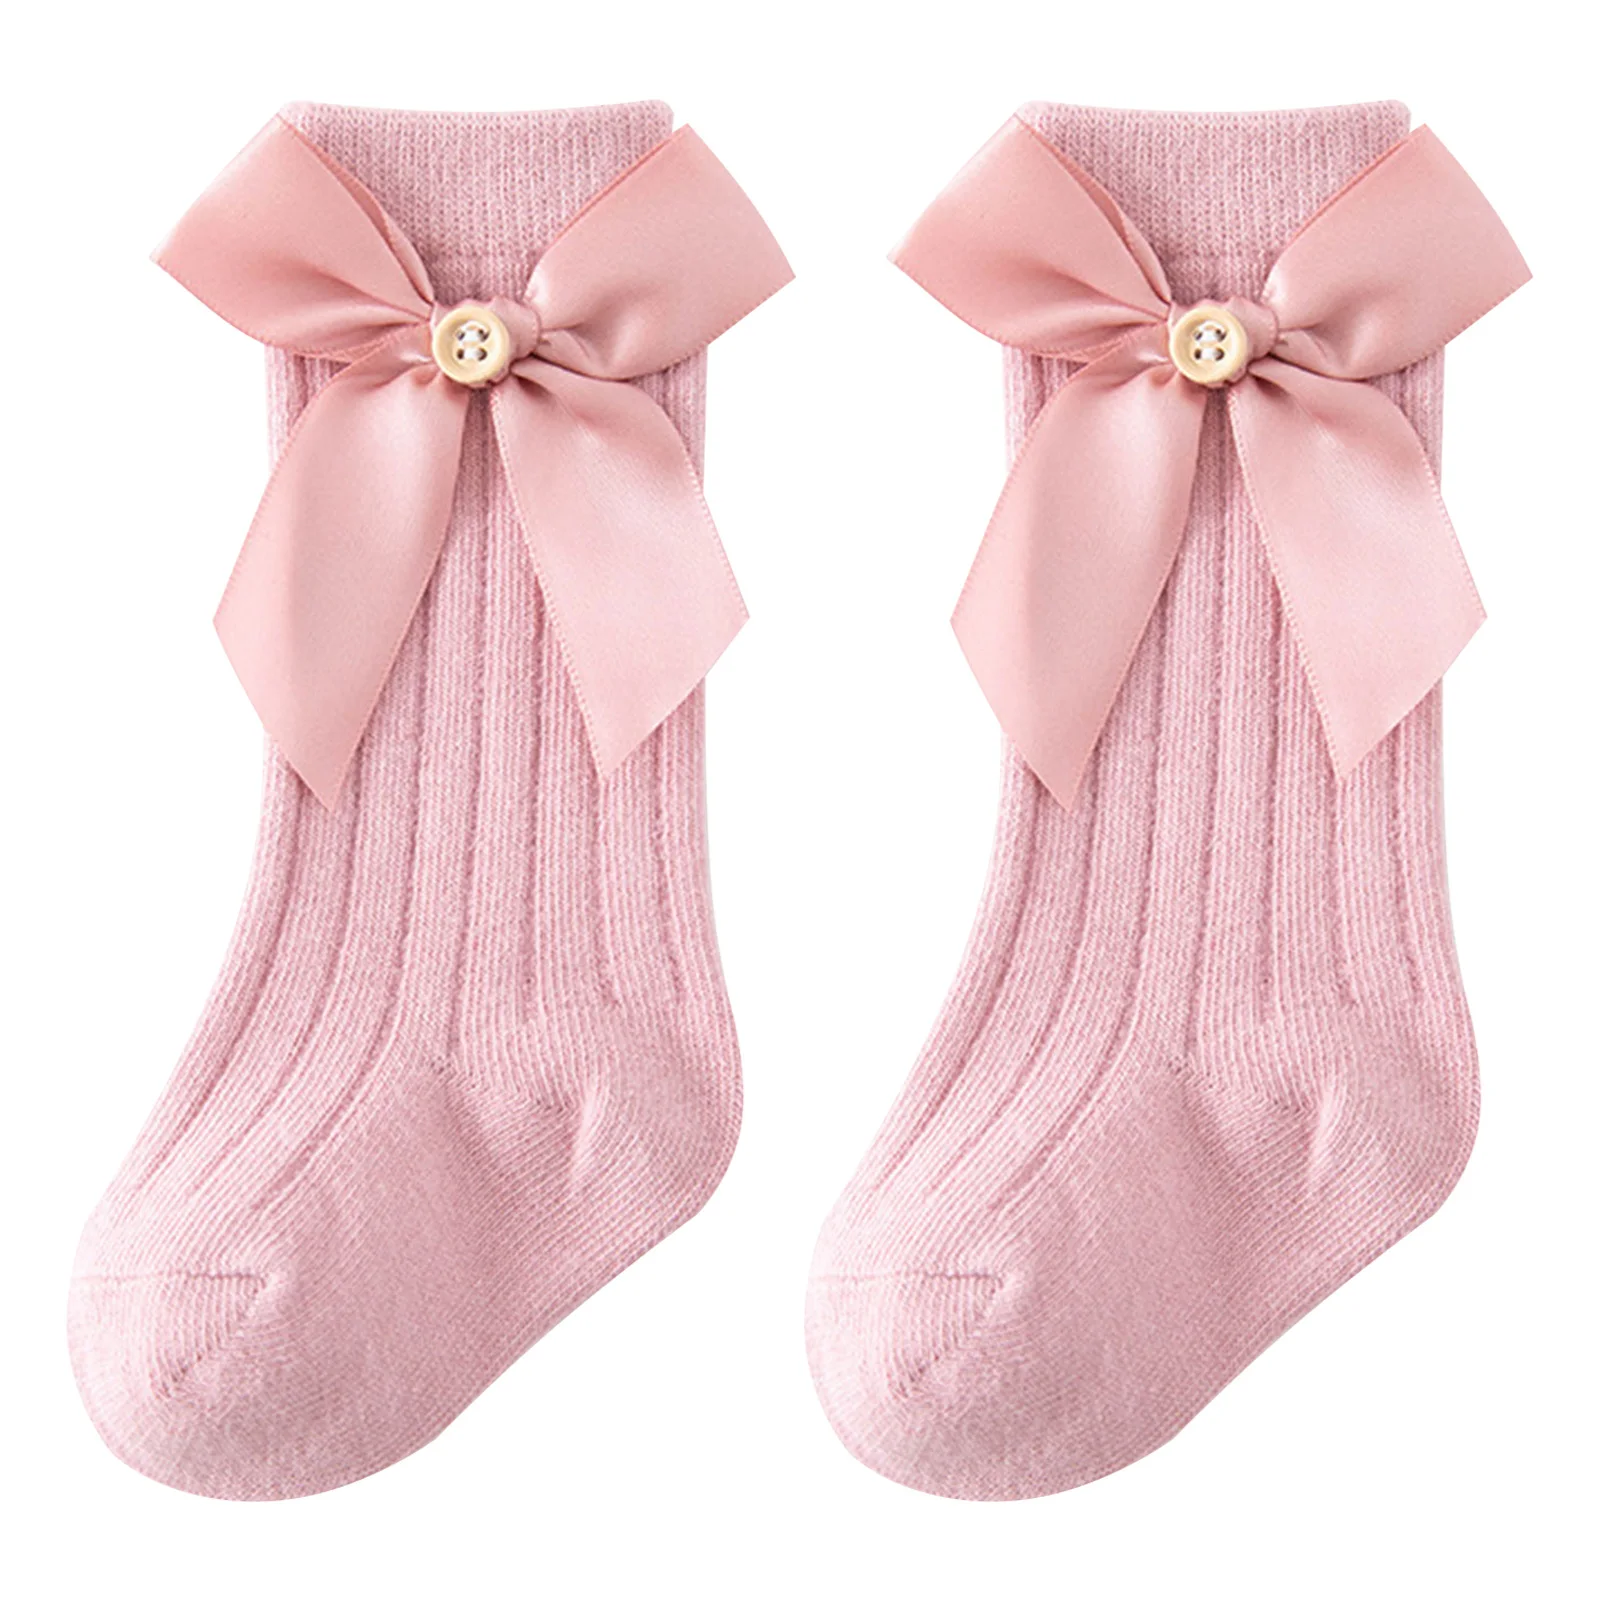 

Toddlers Baby Girls Knee High Socks Stretchy Knitted Socks Fashion Bowknot Tube Ruffled Uniform Stockings for Birthday Party